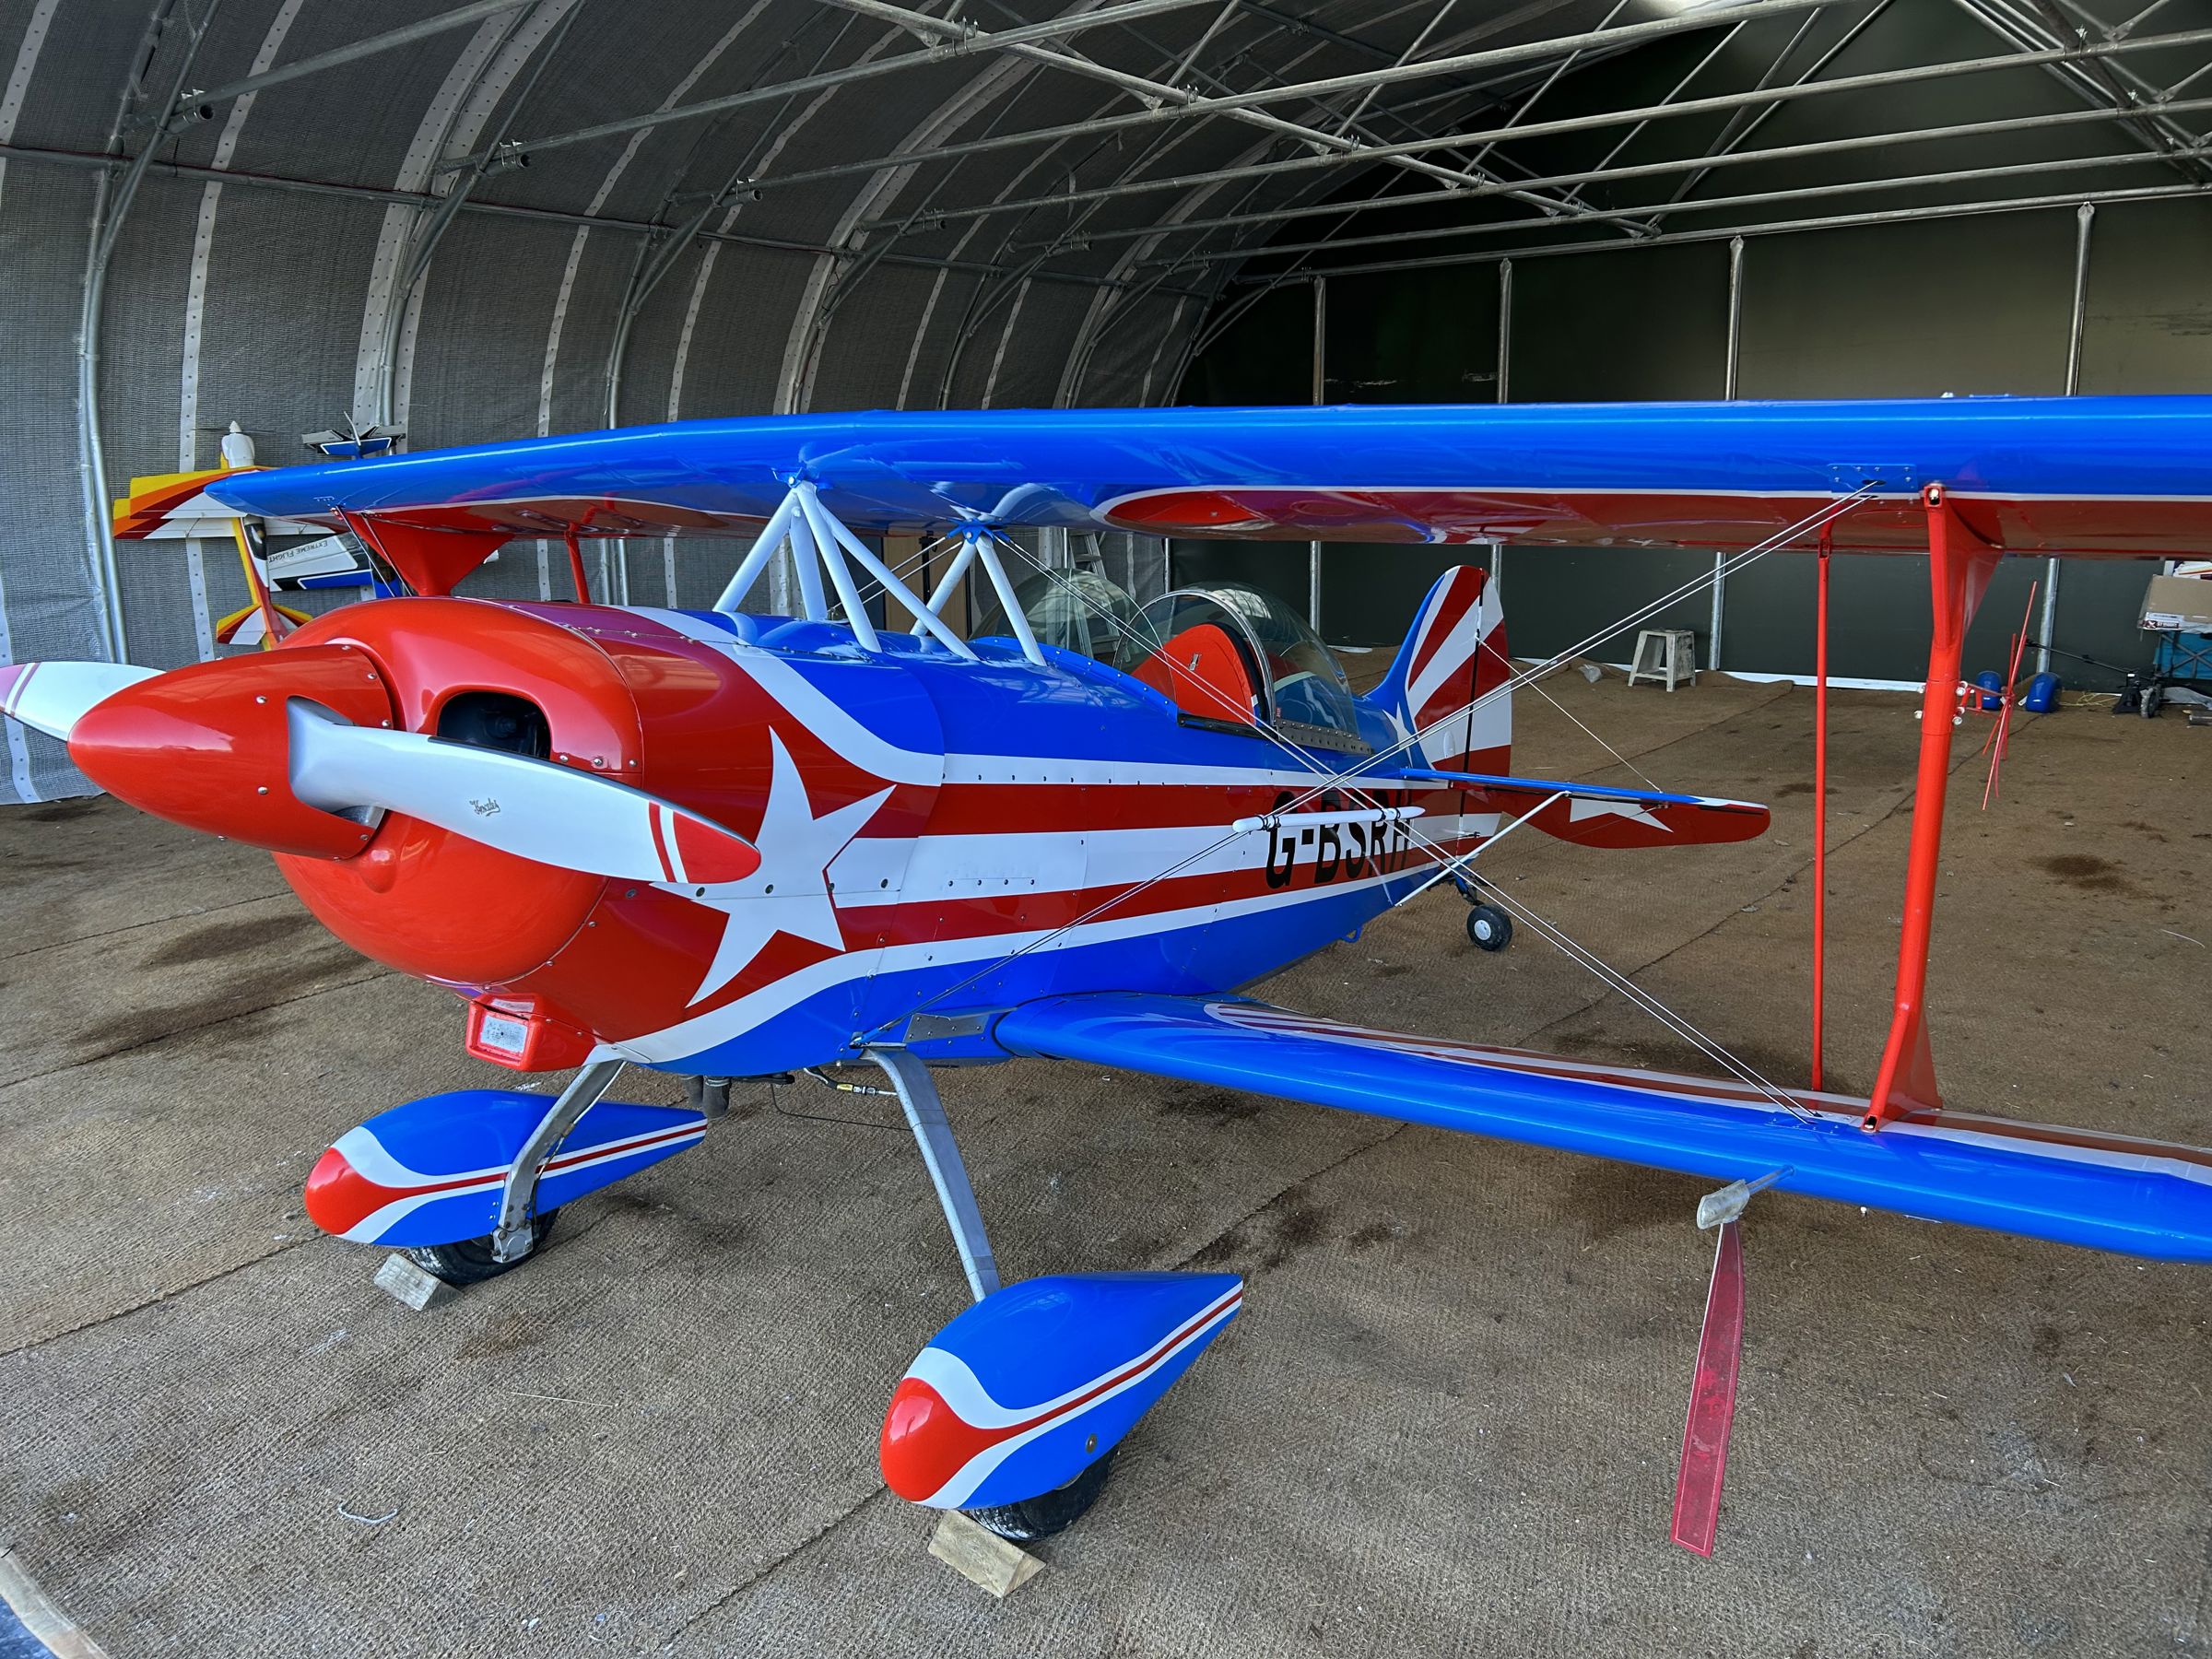 1964 Pitts S-1 Special C